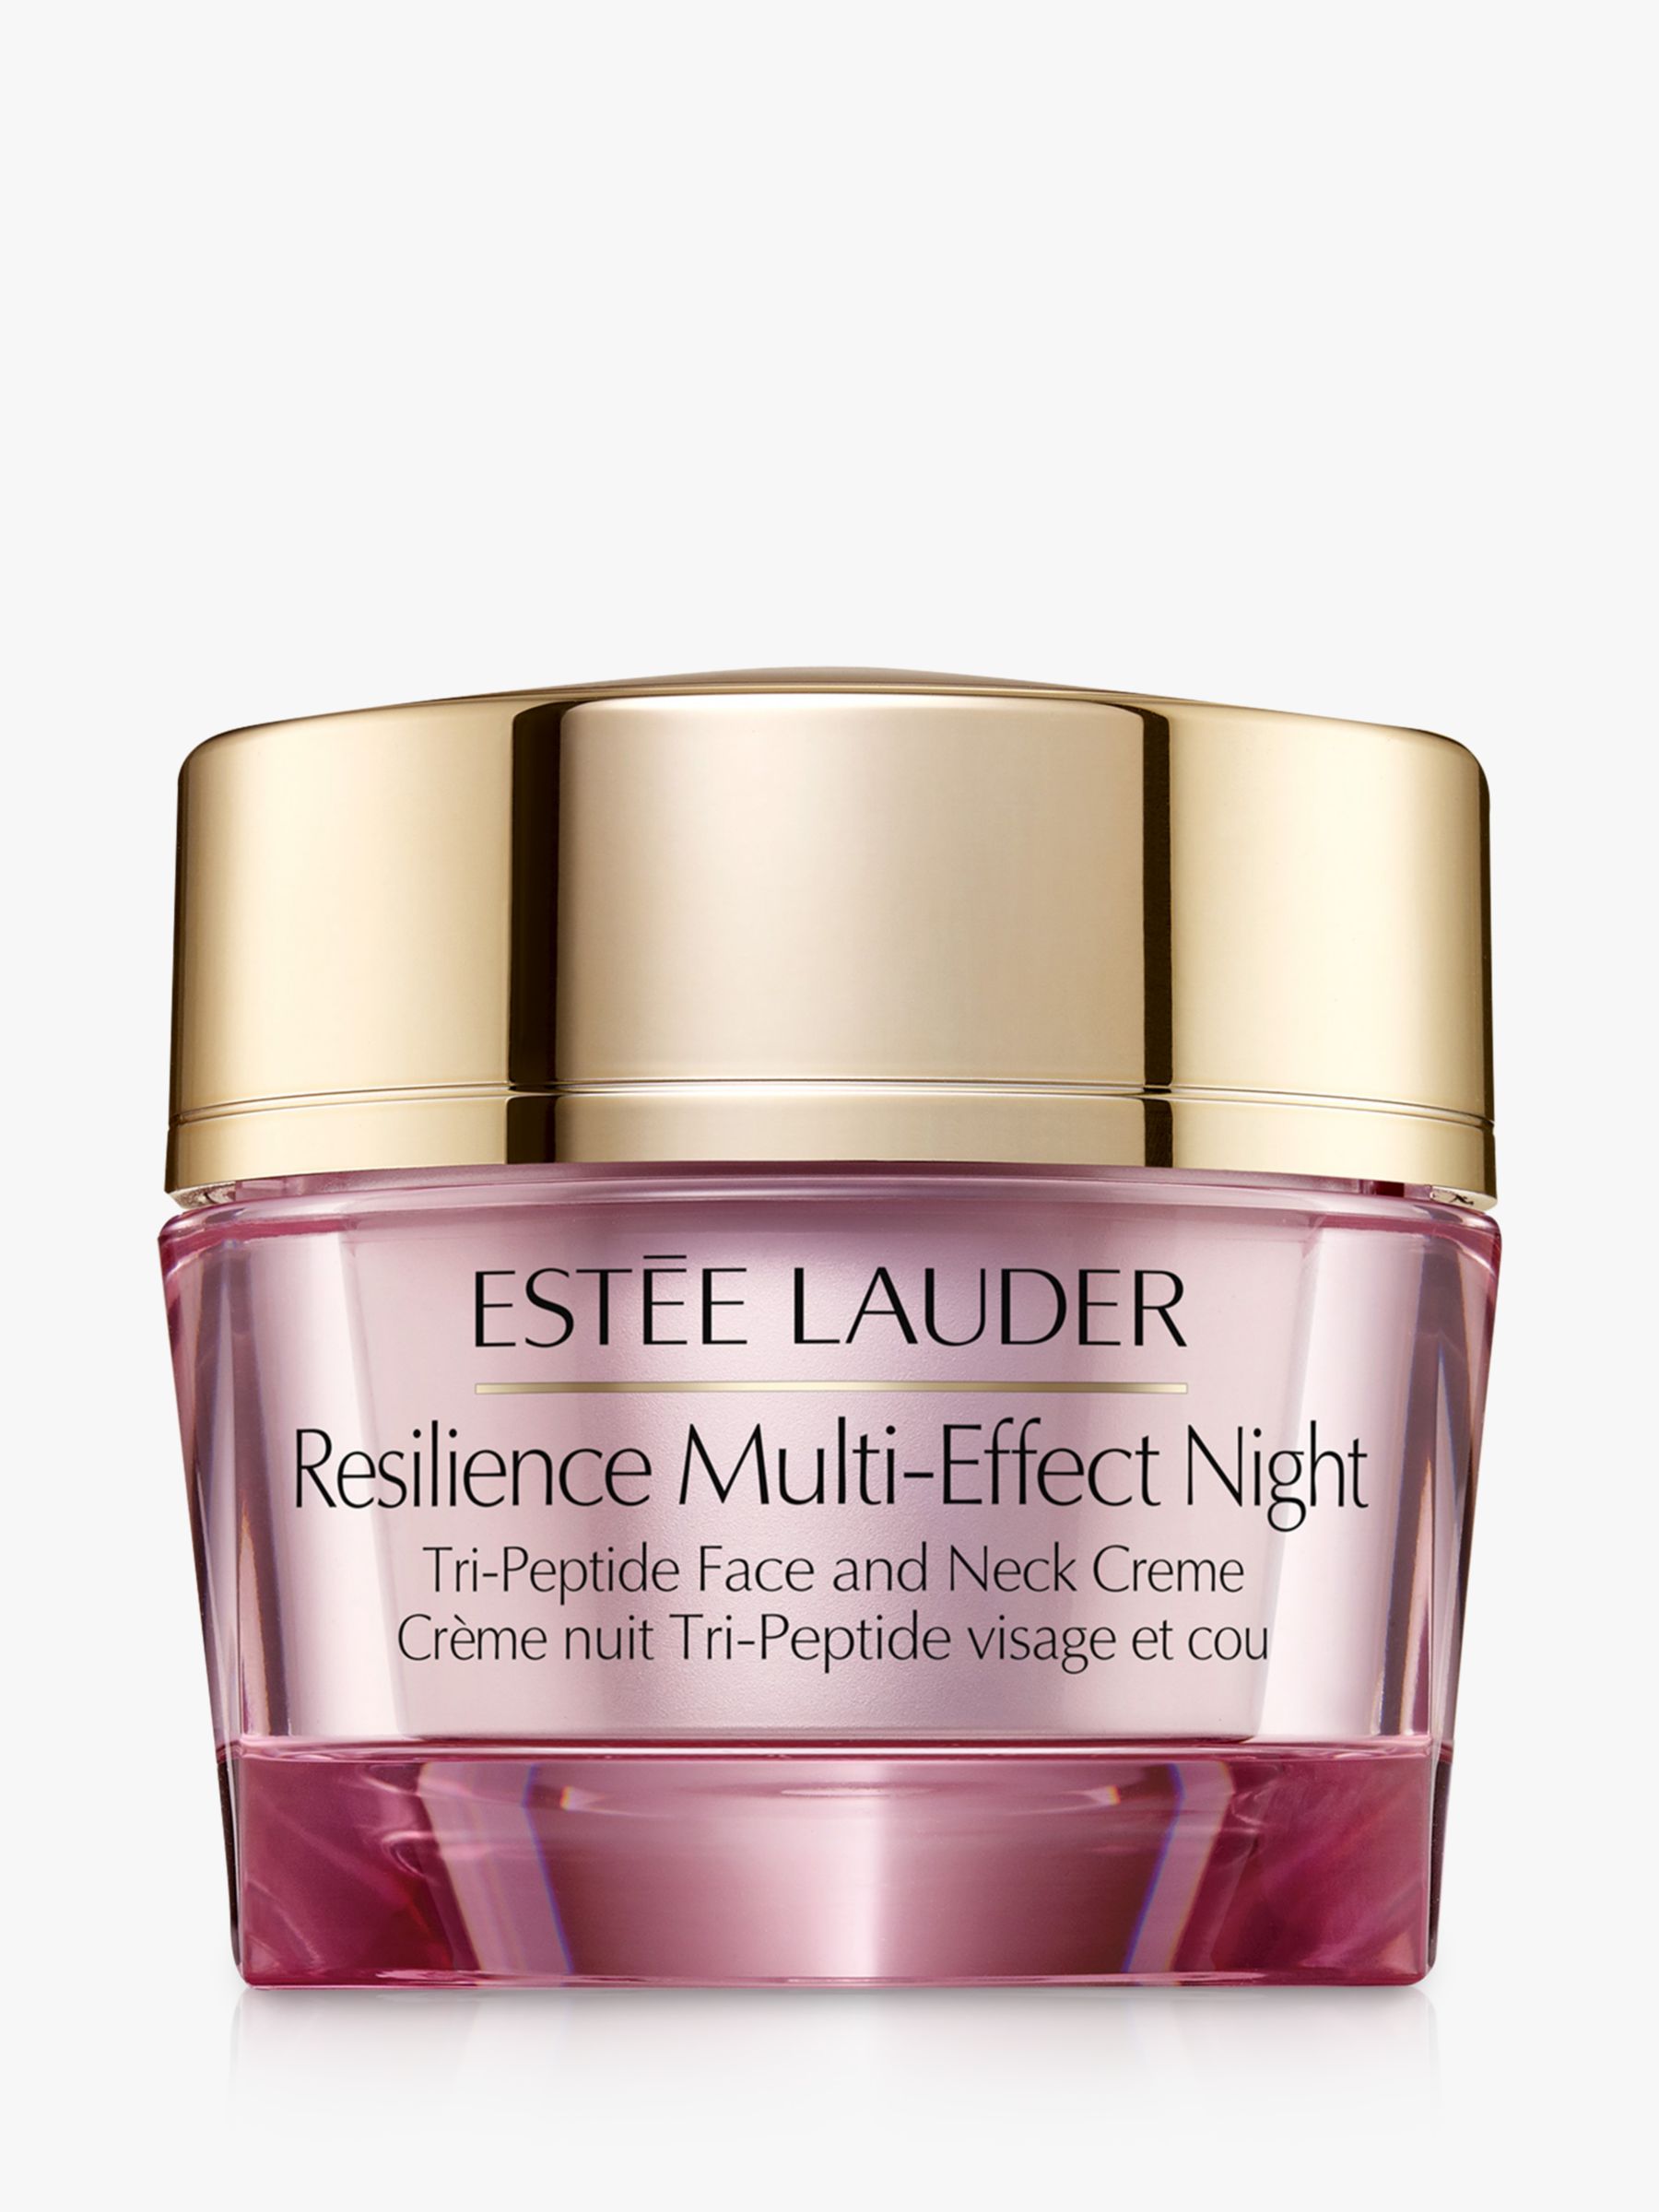 Estée Lauder Resilience Lift Night Firming Face And Neck Creme 50ml At